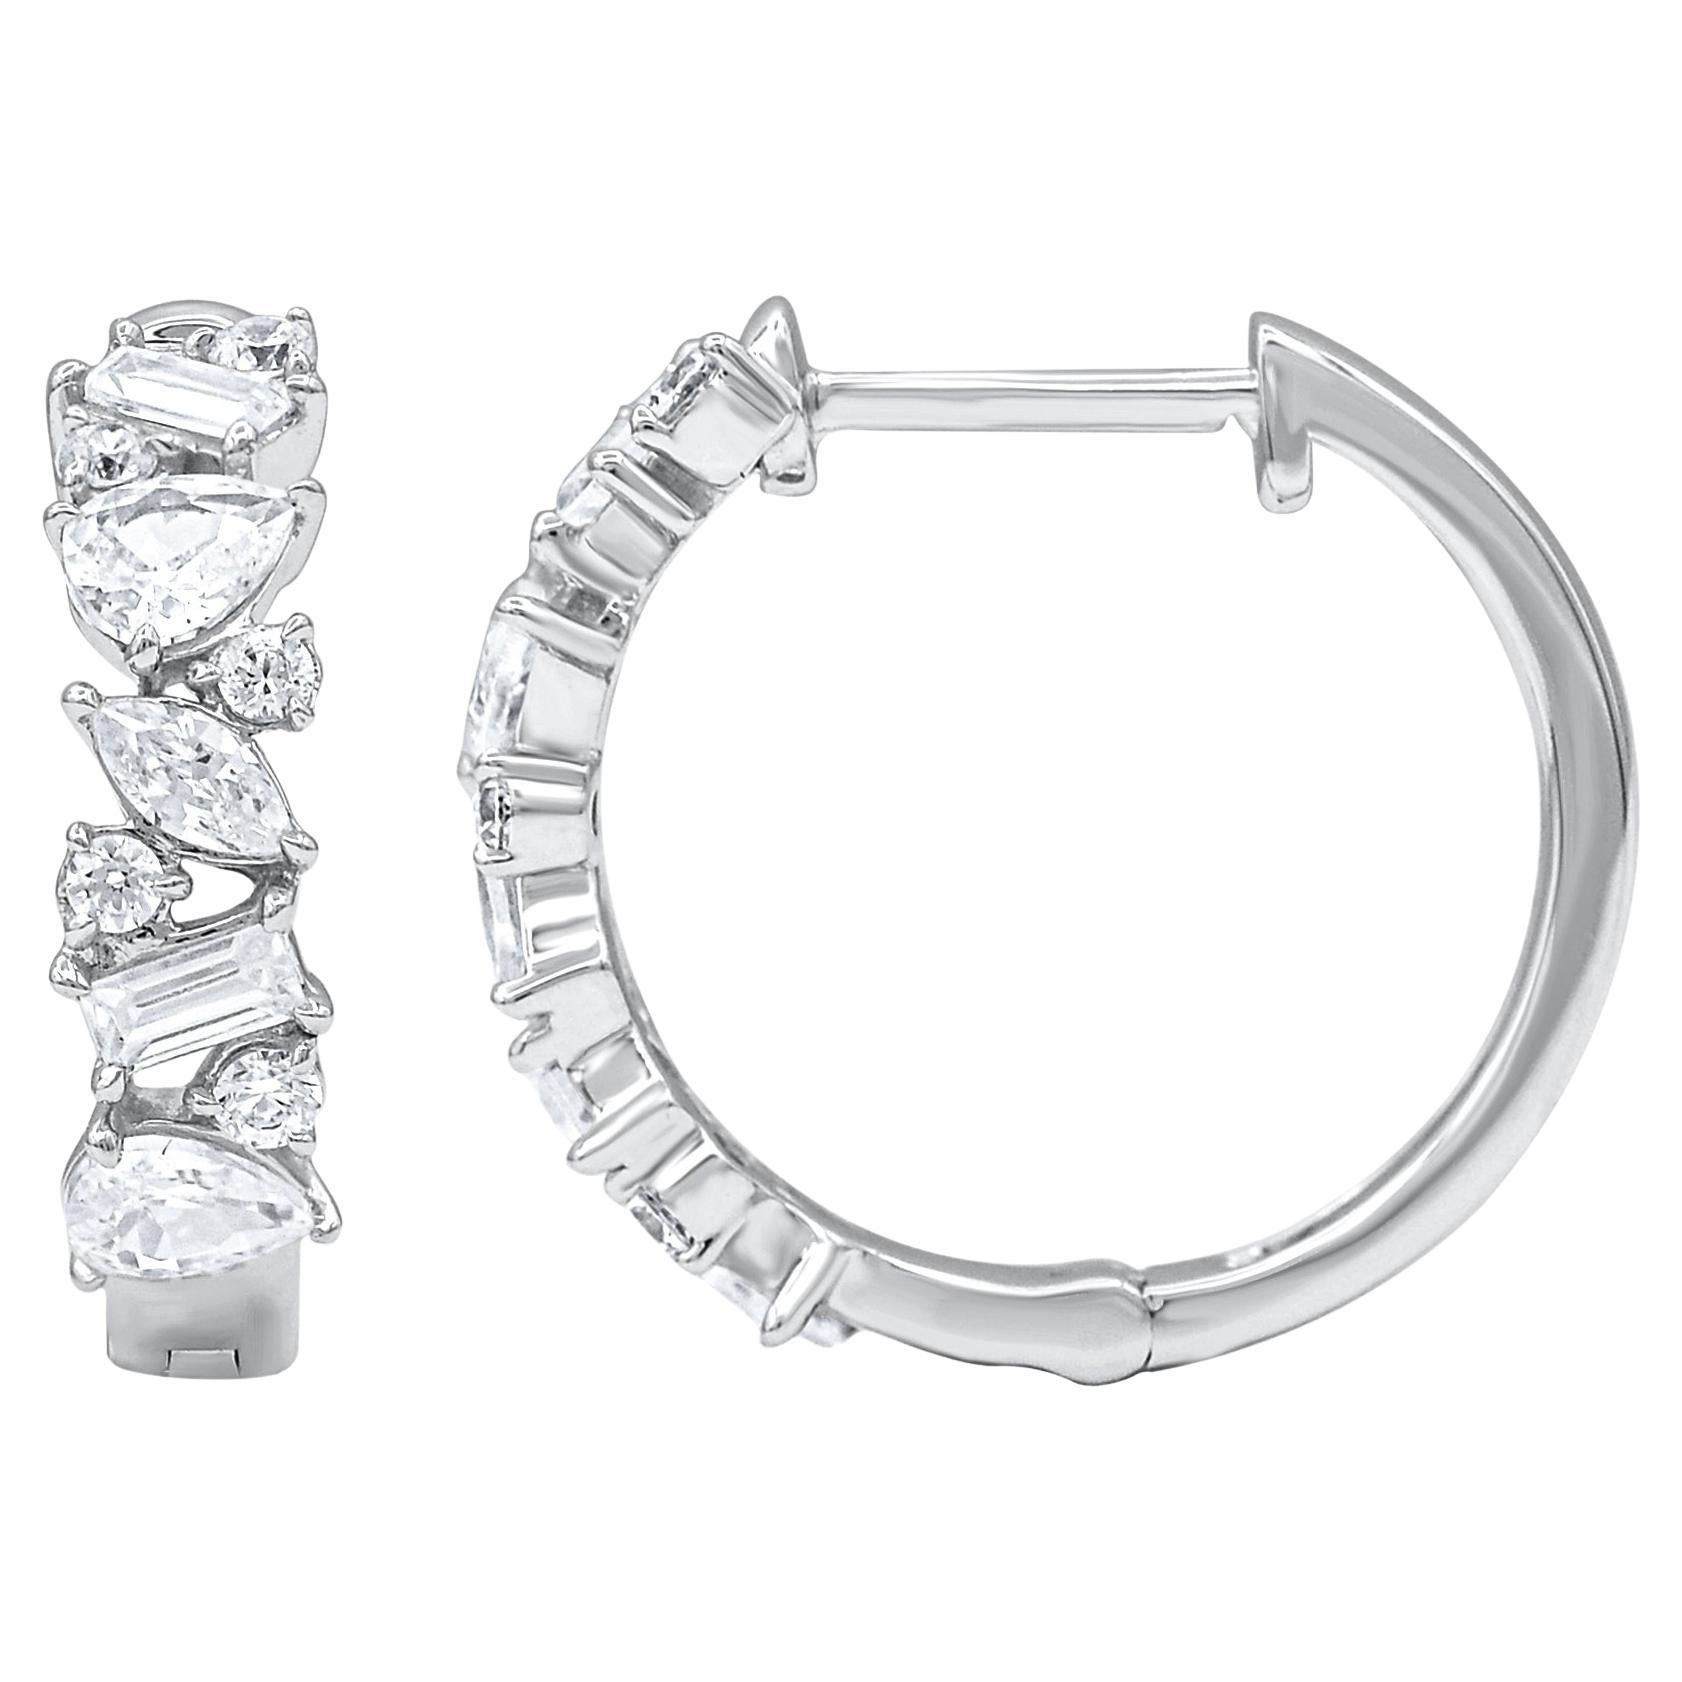 Timeless and elegant, these diamond hoop earrings are a style you'll wear with every look in your wardrobe. Crafted in 14 karat white gold with 20 Pear, Marquise, baguette & brilliant cut diamond in prong setting. Total diamond weight is 1.0 carat.